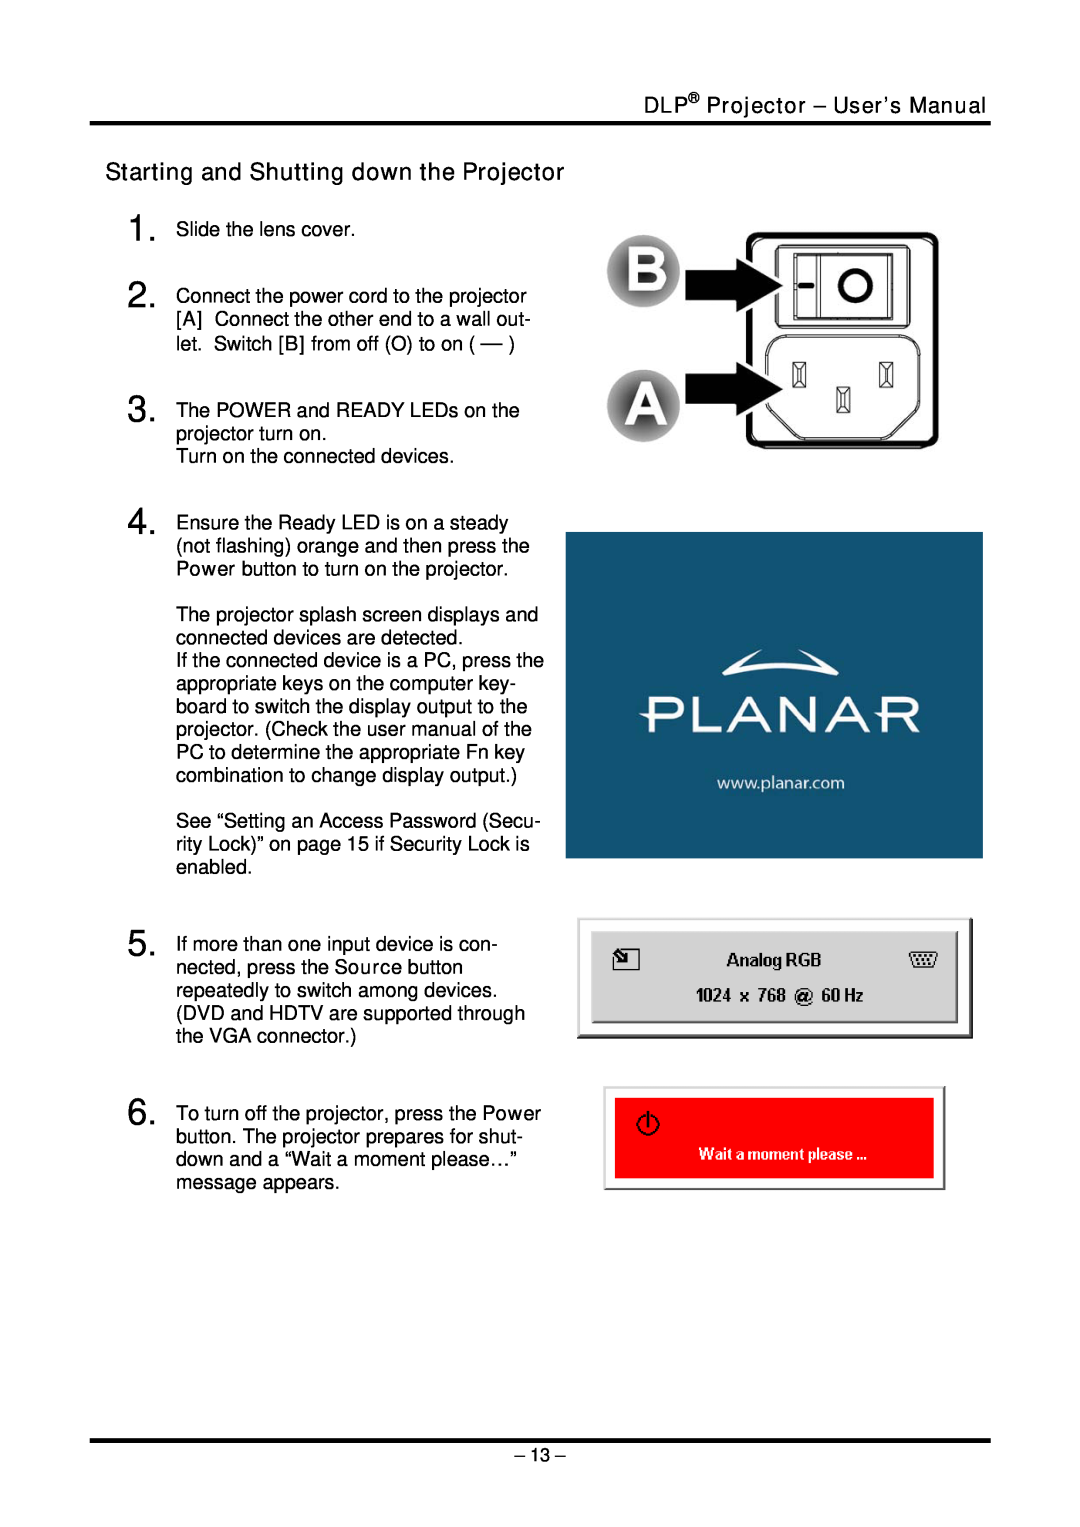 Planar PR5022 manual Starting and Shutting down the Projector, DLP Projector - User’s Manual 